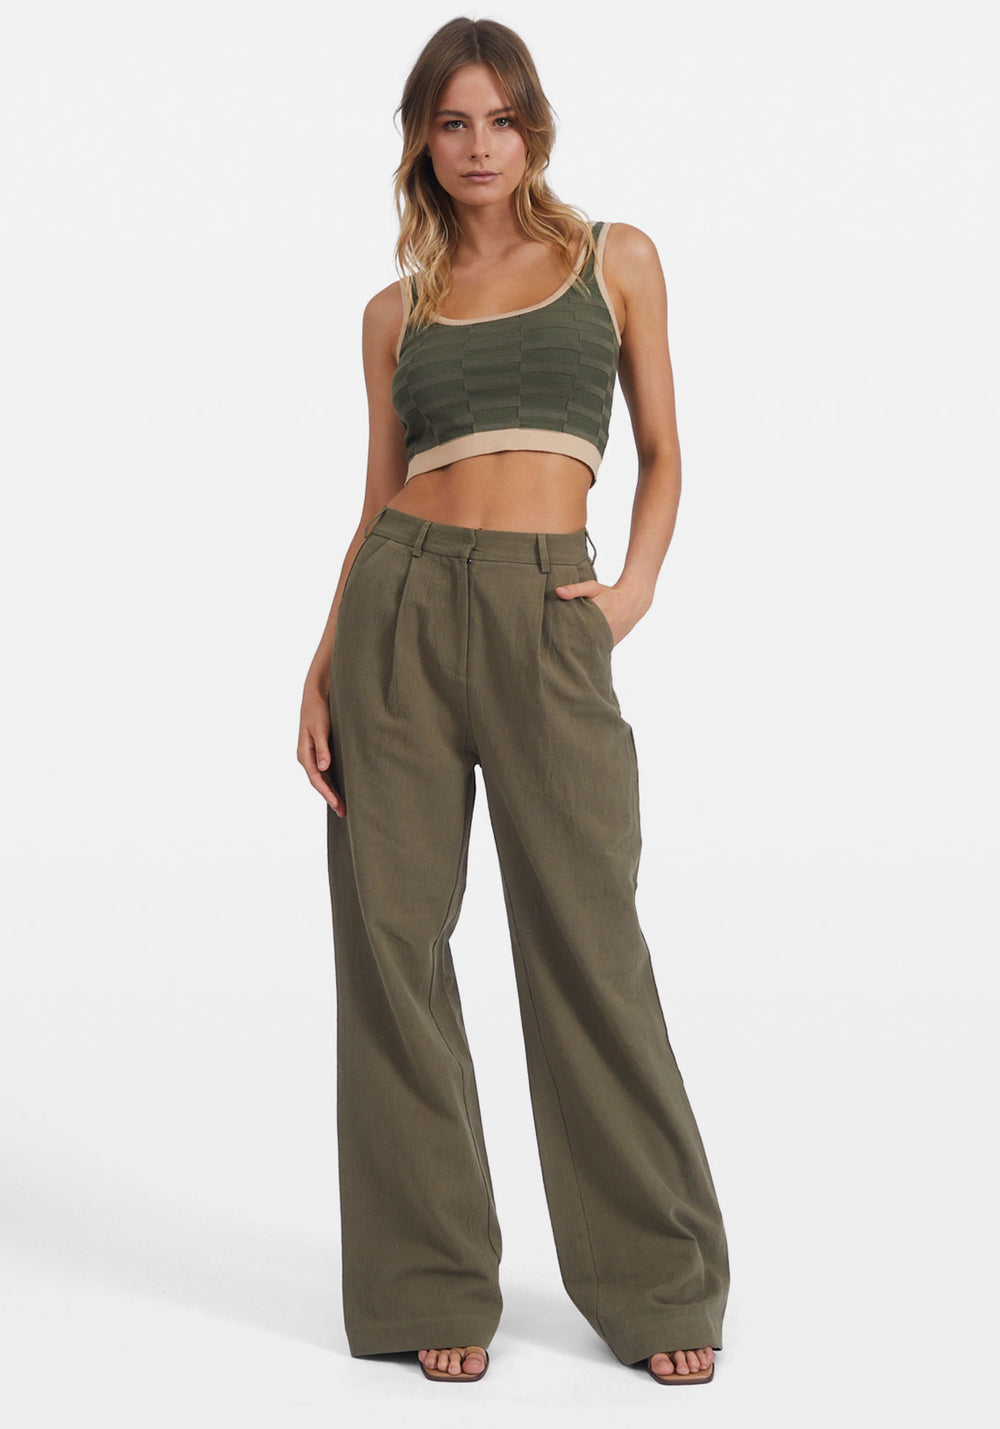 Knit Crop Top Army/Sand